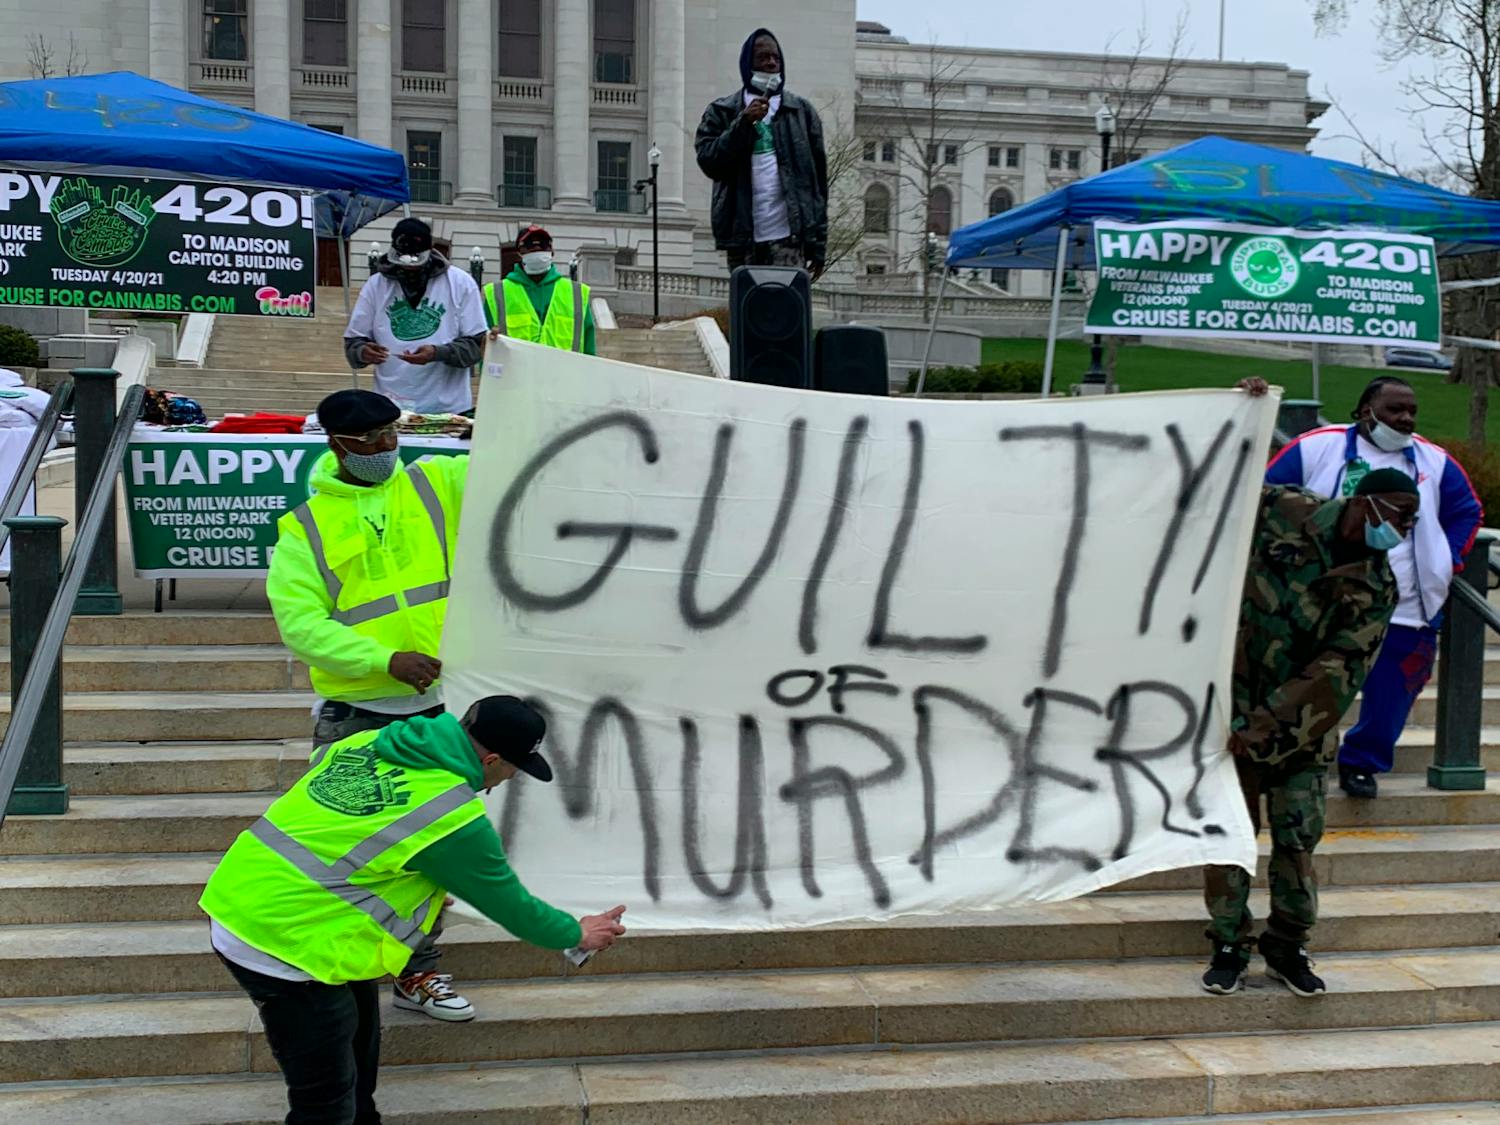 Photo of a group of men holding up a sign that says "Guilty of Murder" in reference to the Chauvin trial.